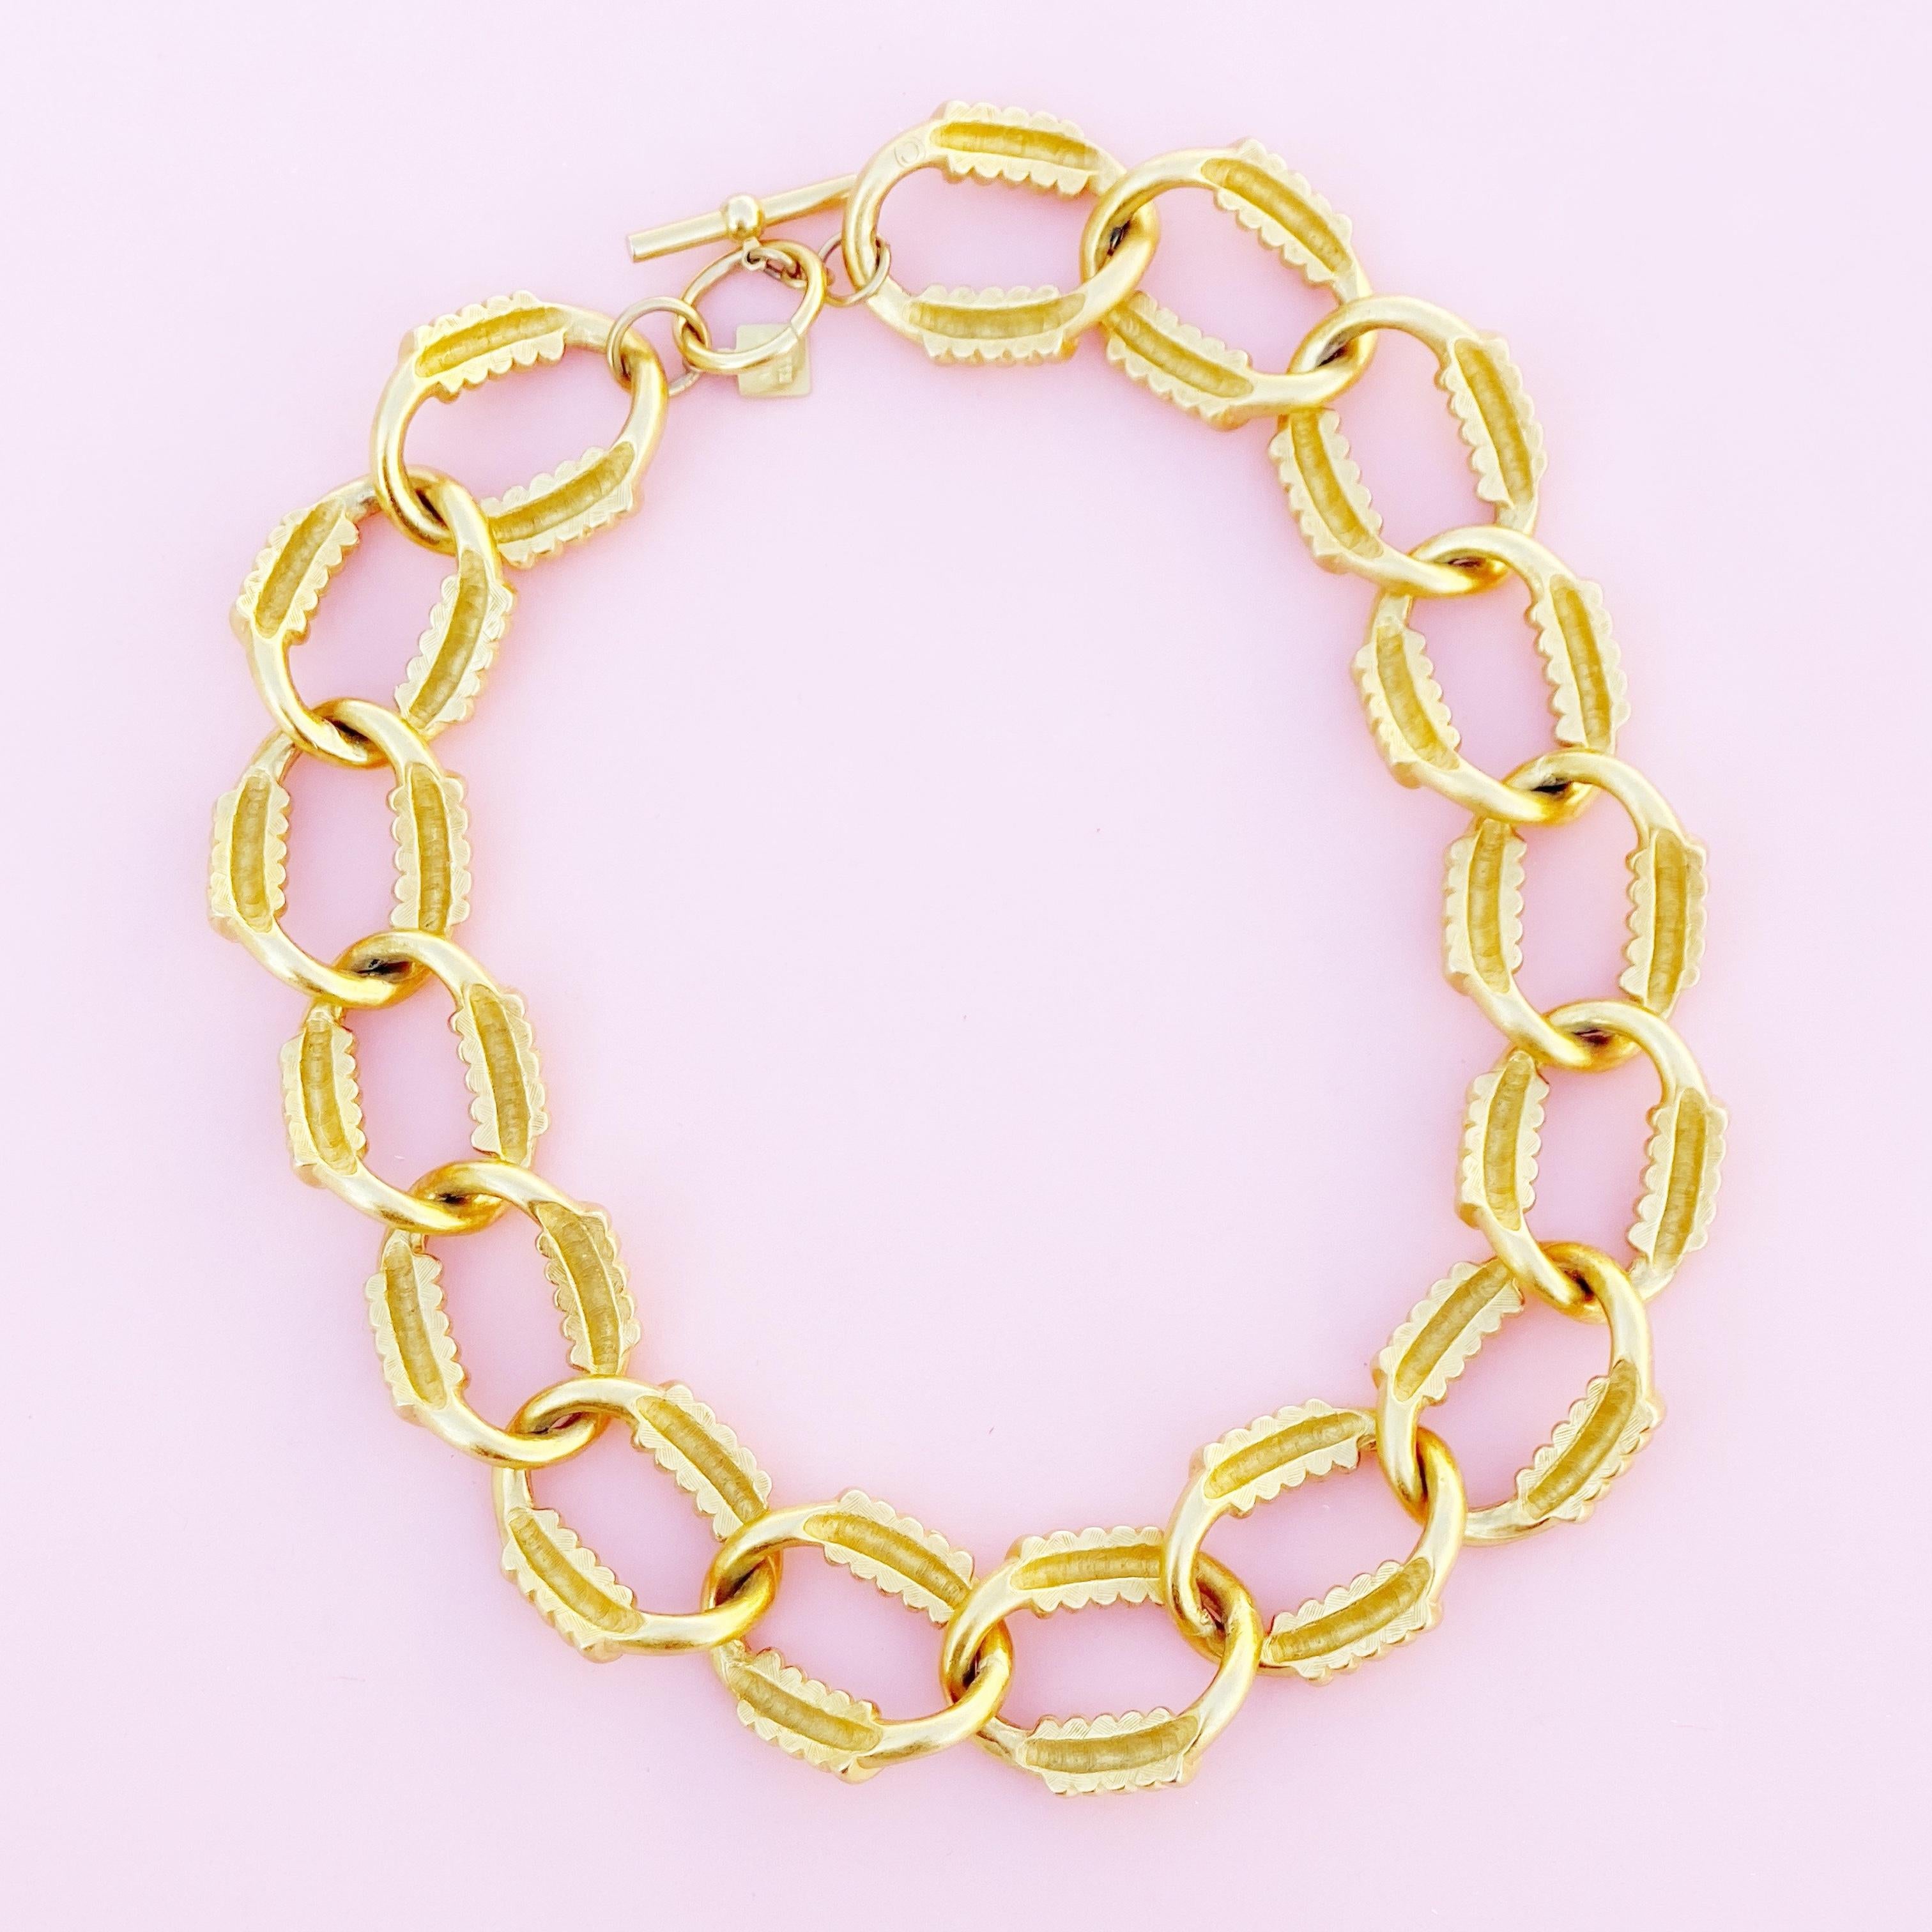 Women's Vintage Gilded Heavy Chain Link Statement Choker Necklace By Anne Klein, 1980s For Sale